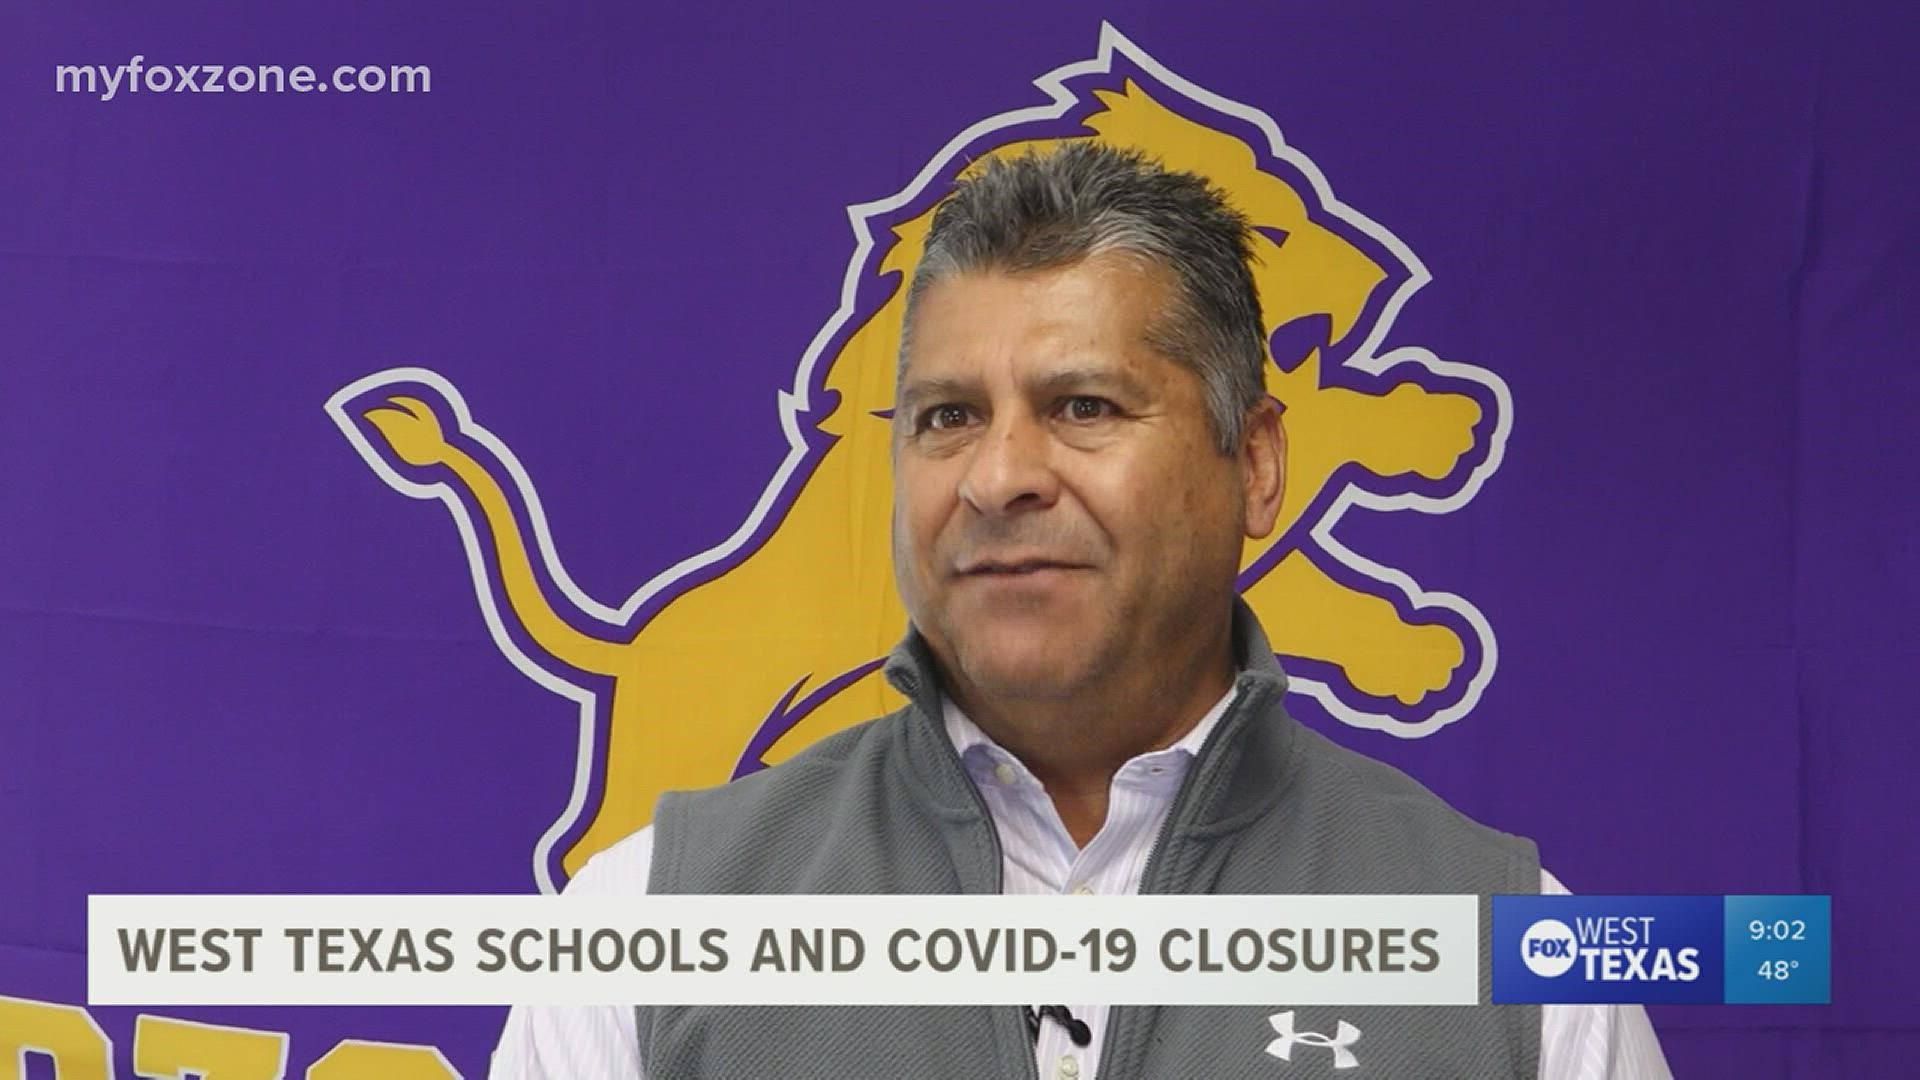 Staffing shortages and a rise in COVID-19 cases are causing closures in schools and churches.